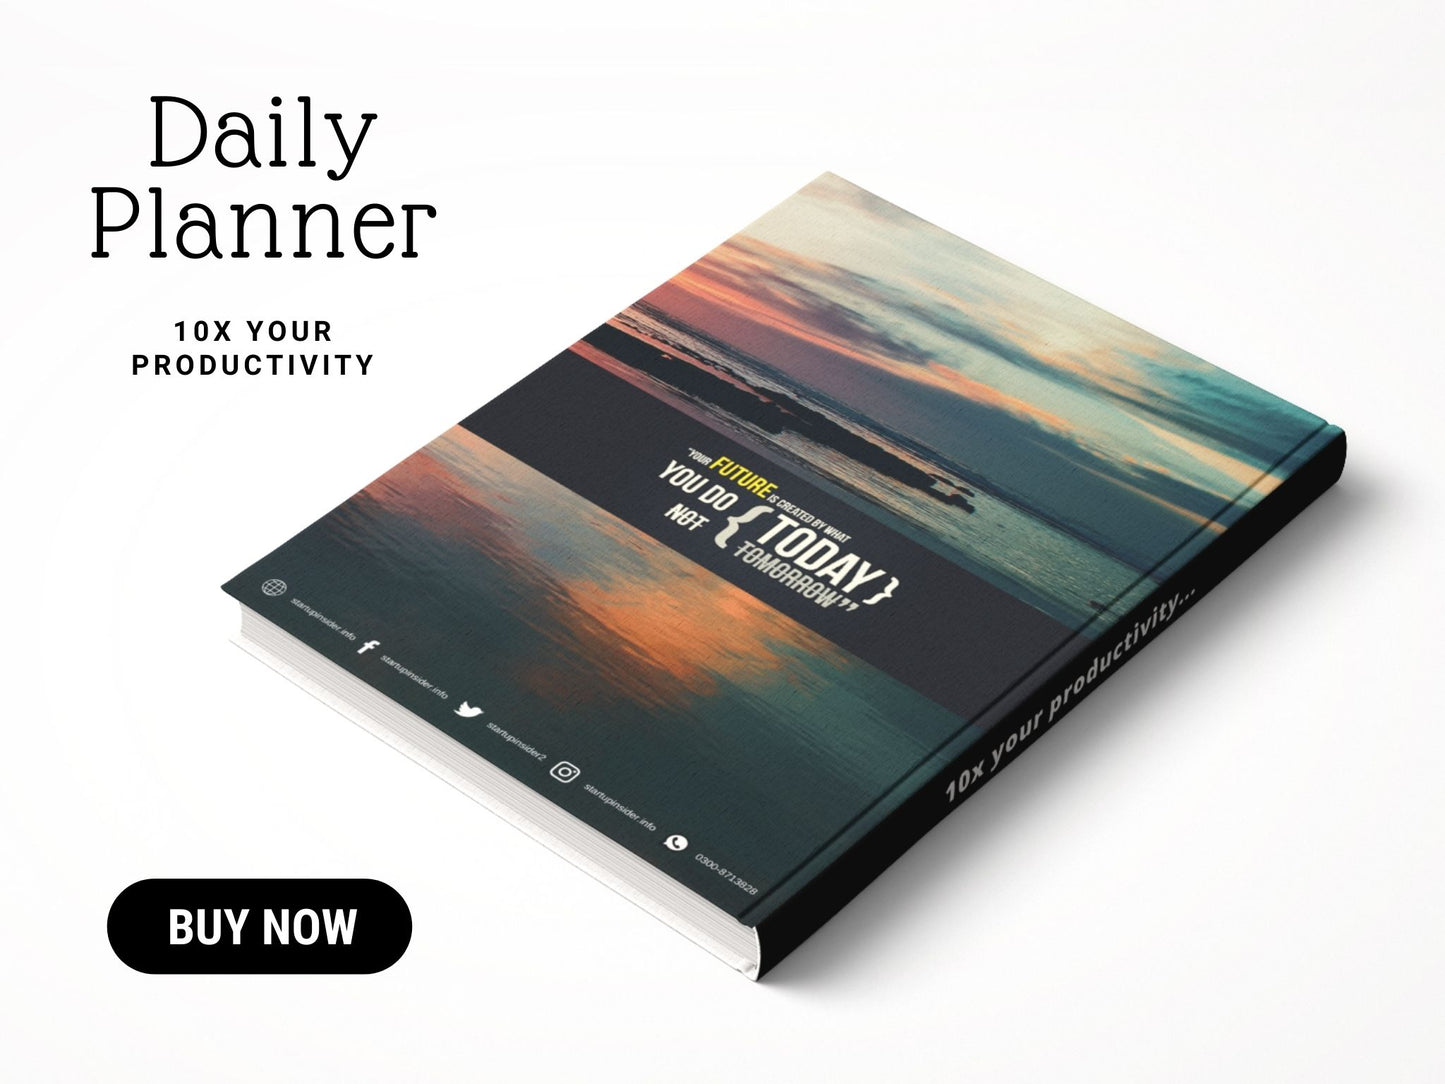 The Ultimate Daily Planner